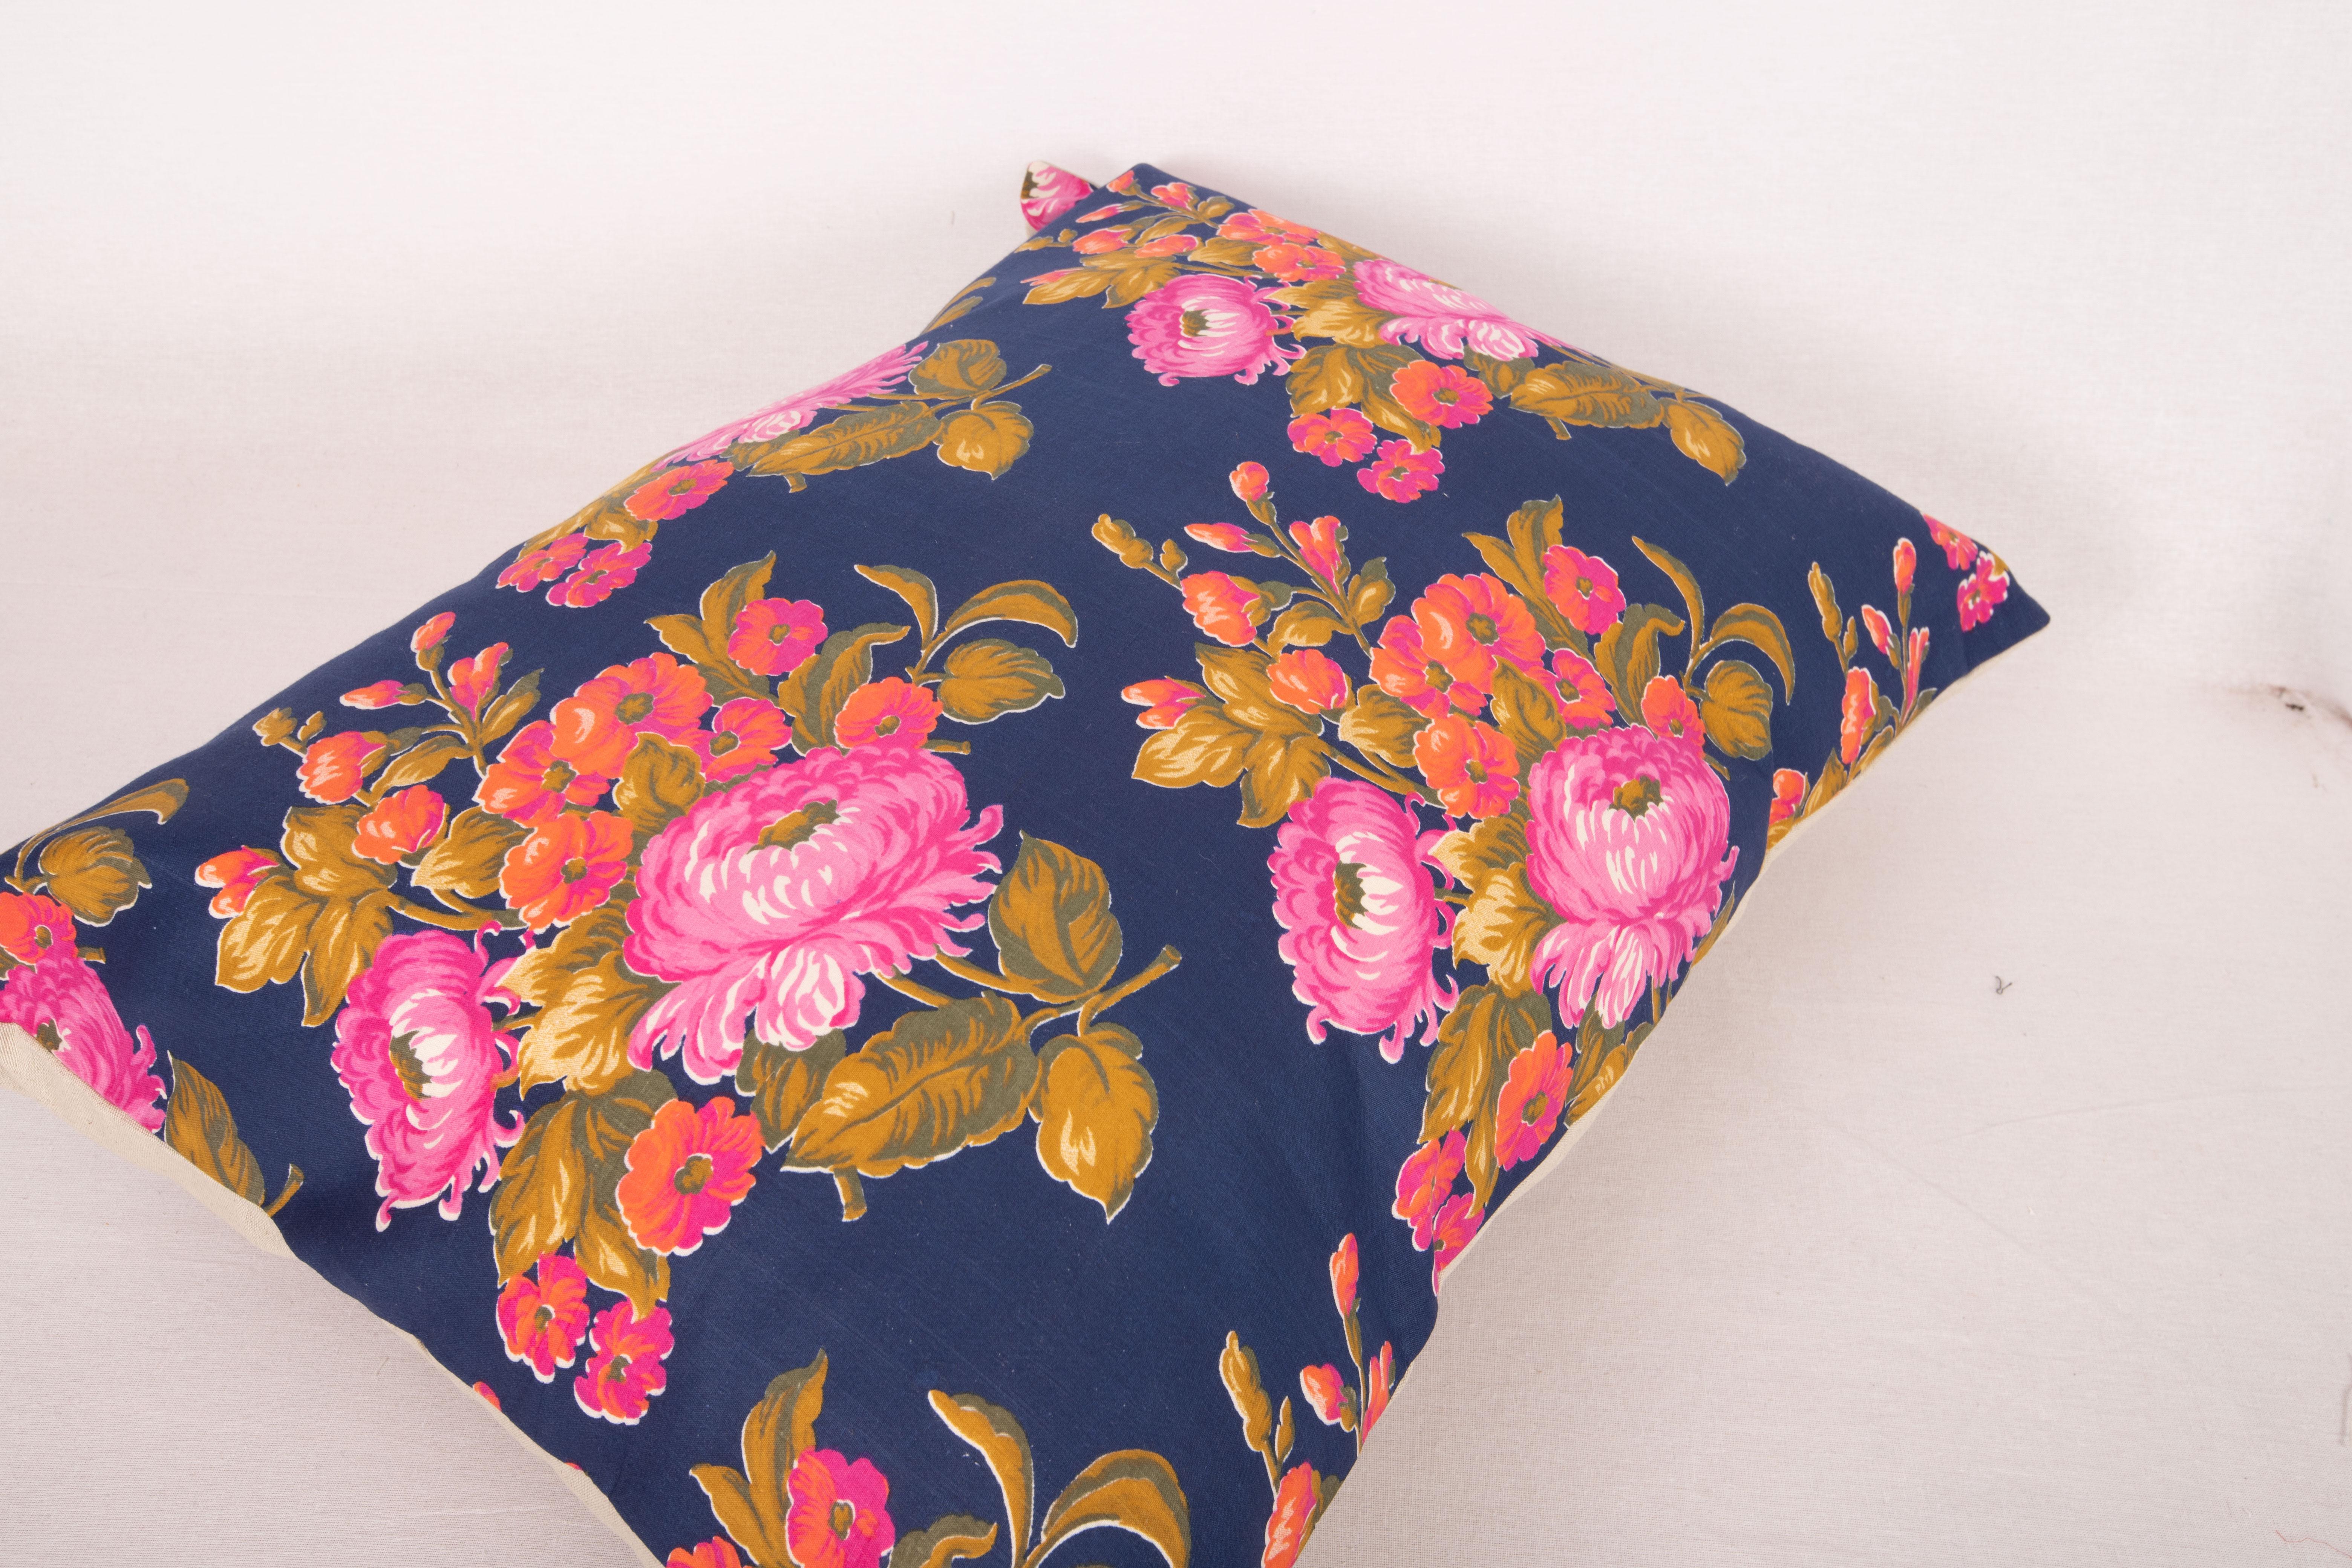 Russian Roller Printed Pillow Covers, Mid 20th C. For Sale 2